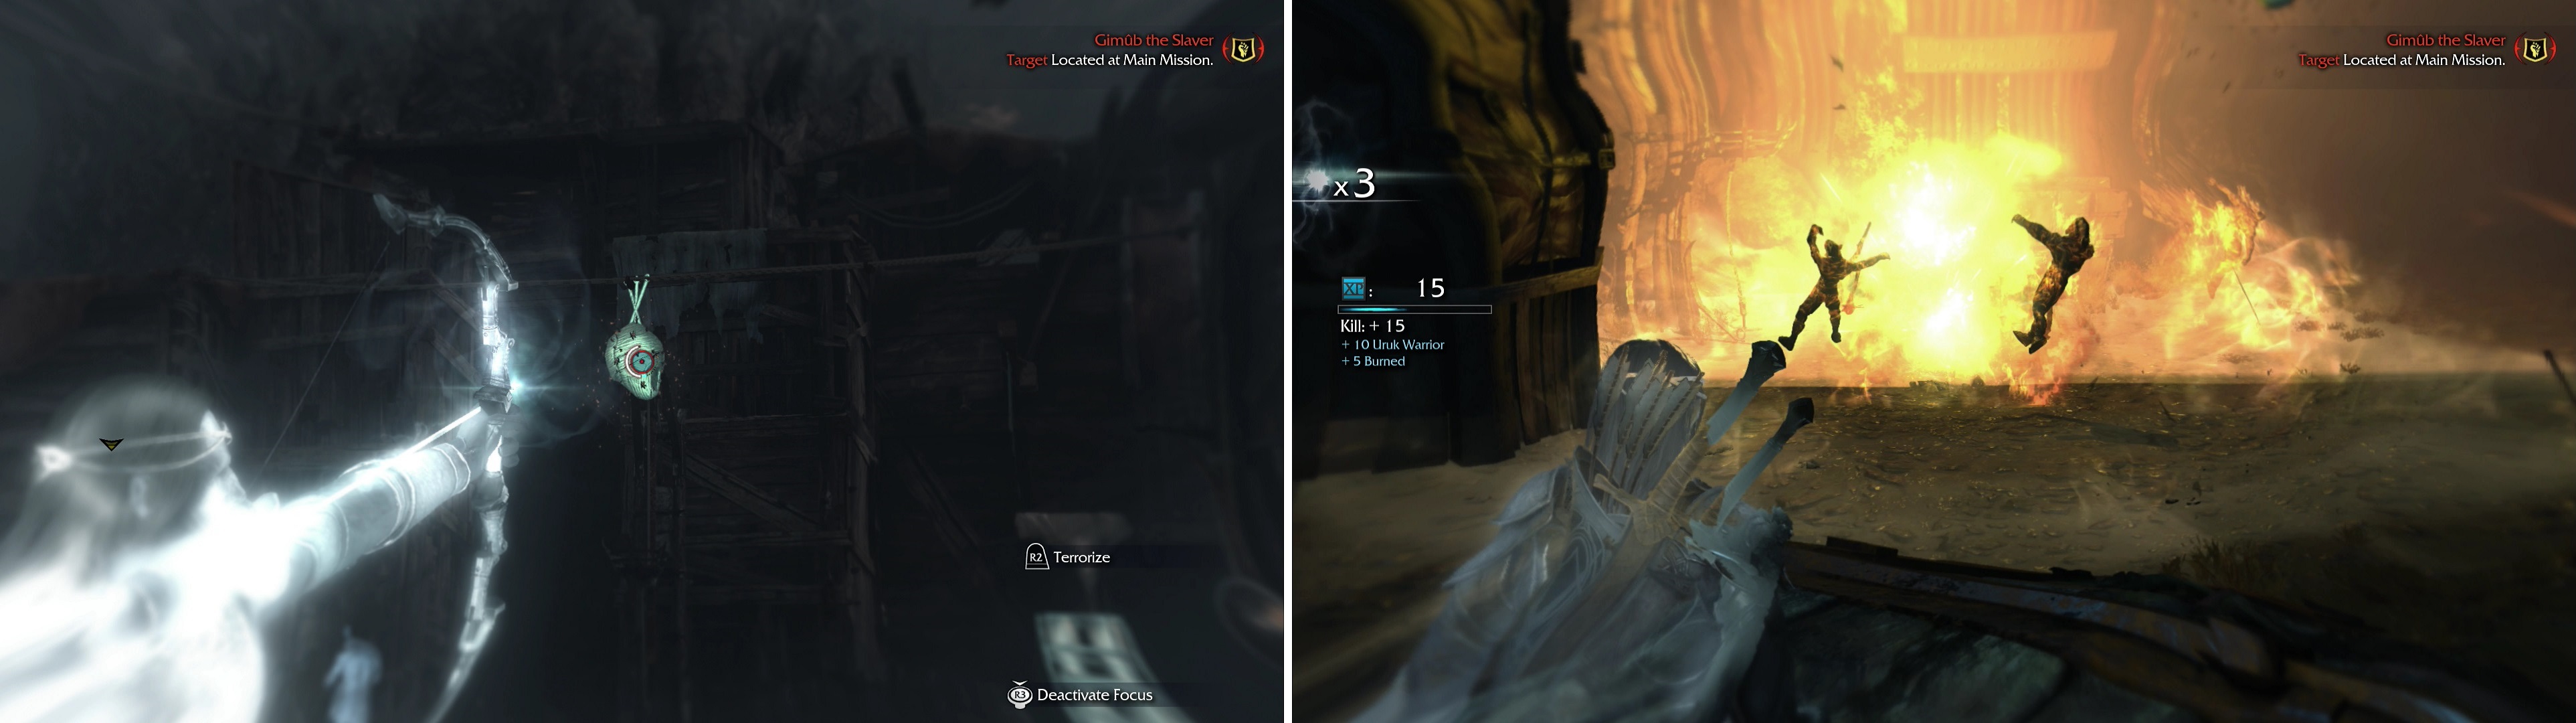 Shooting Morgai Fly Nests will stir up the insects within, to the sorrow of any nearby Uruks (left). Shoot explosive barrels and, if you have the "Detonate" Ability, campfires, to cause potent explosions (right).